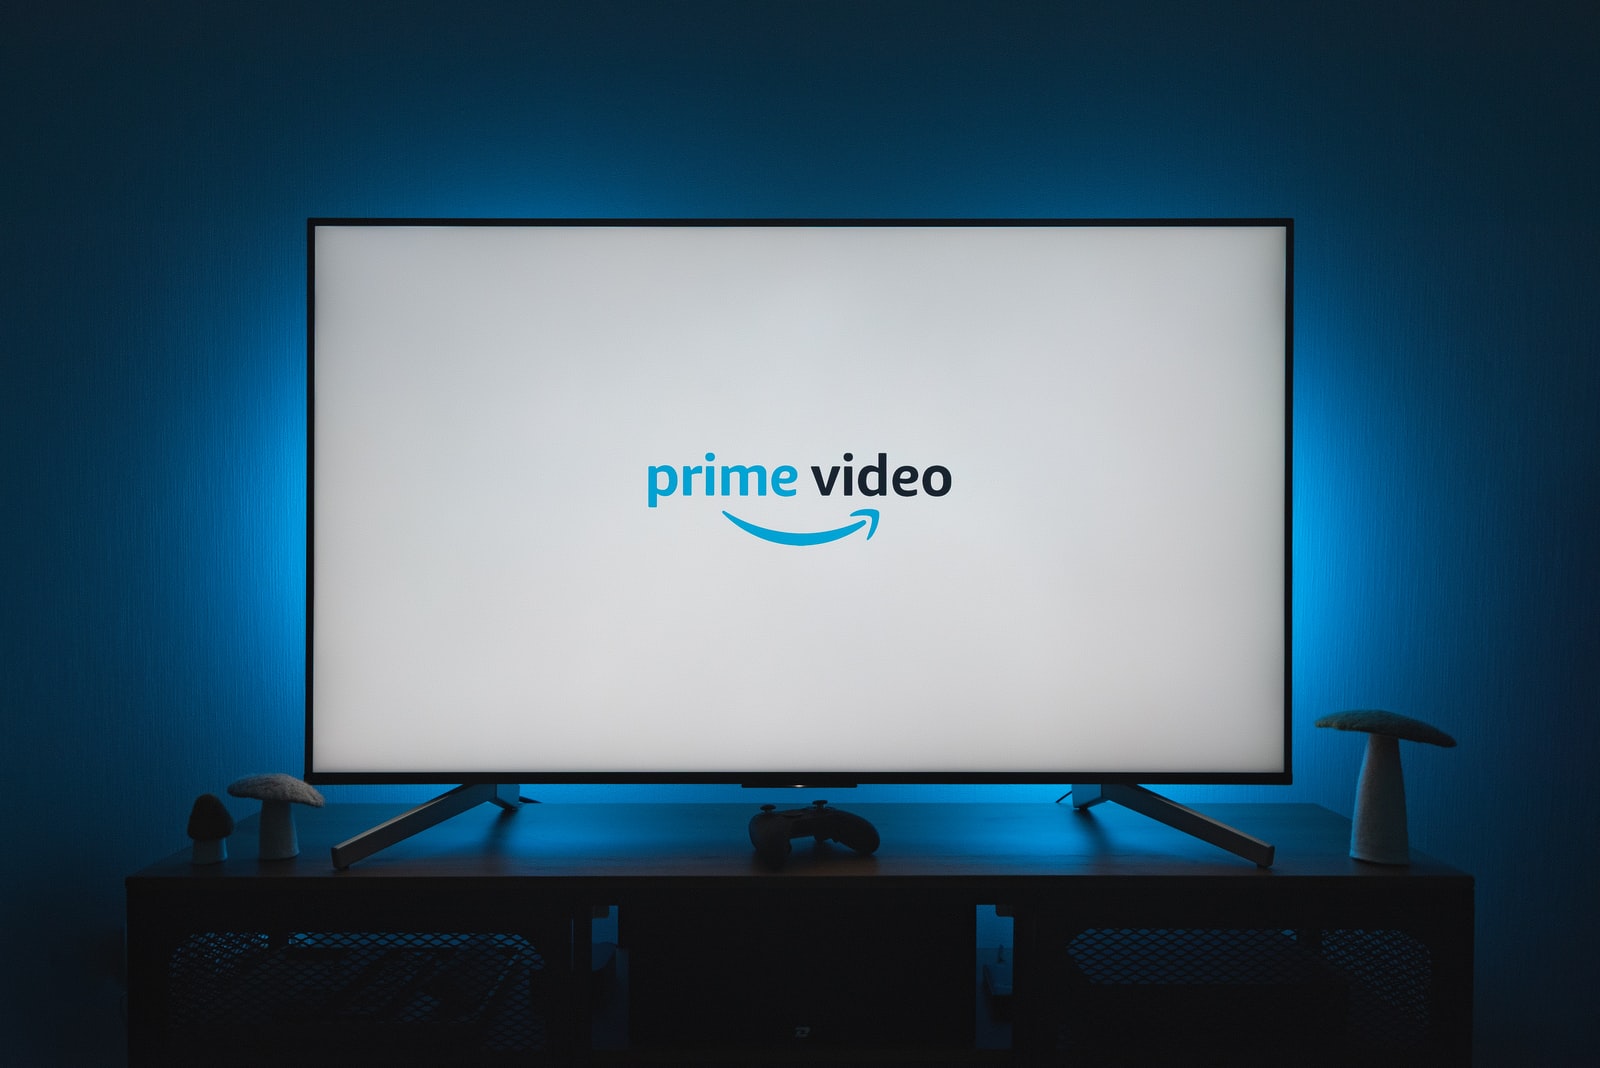 How to rent a movie on Amazon Prime Video